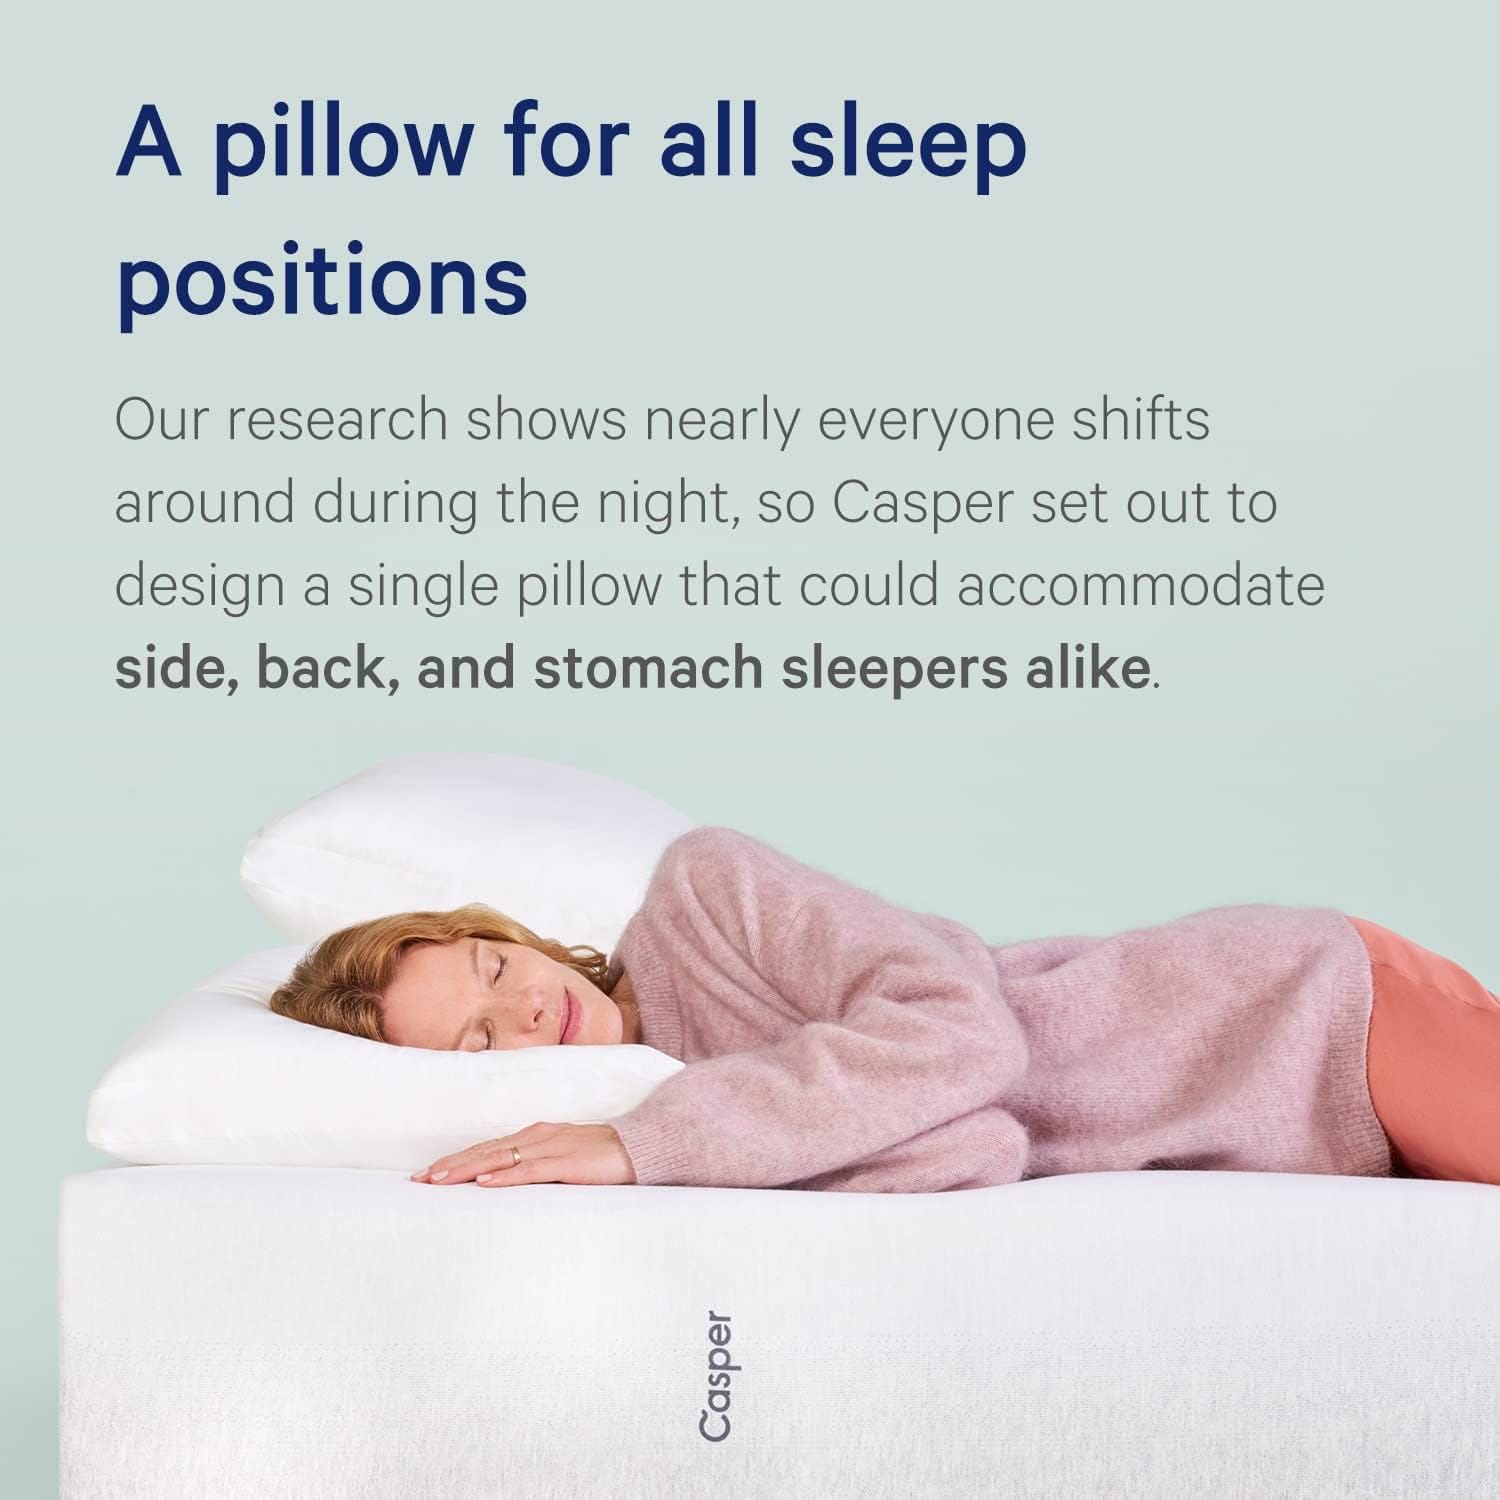 Casper Pillow Review: Is It Worth the Hype?